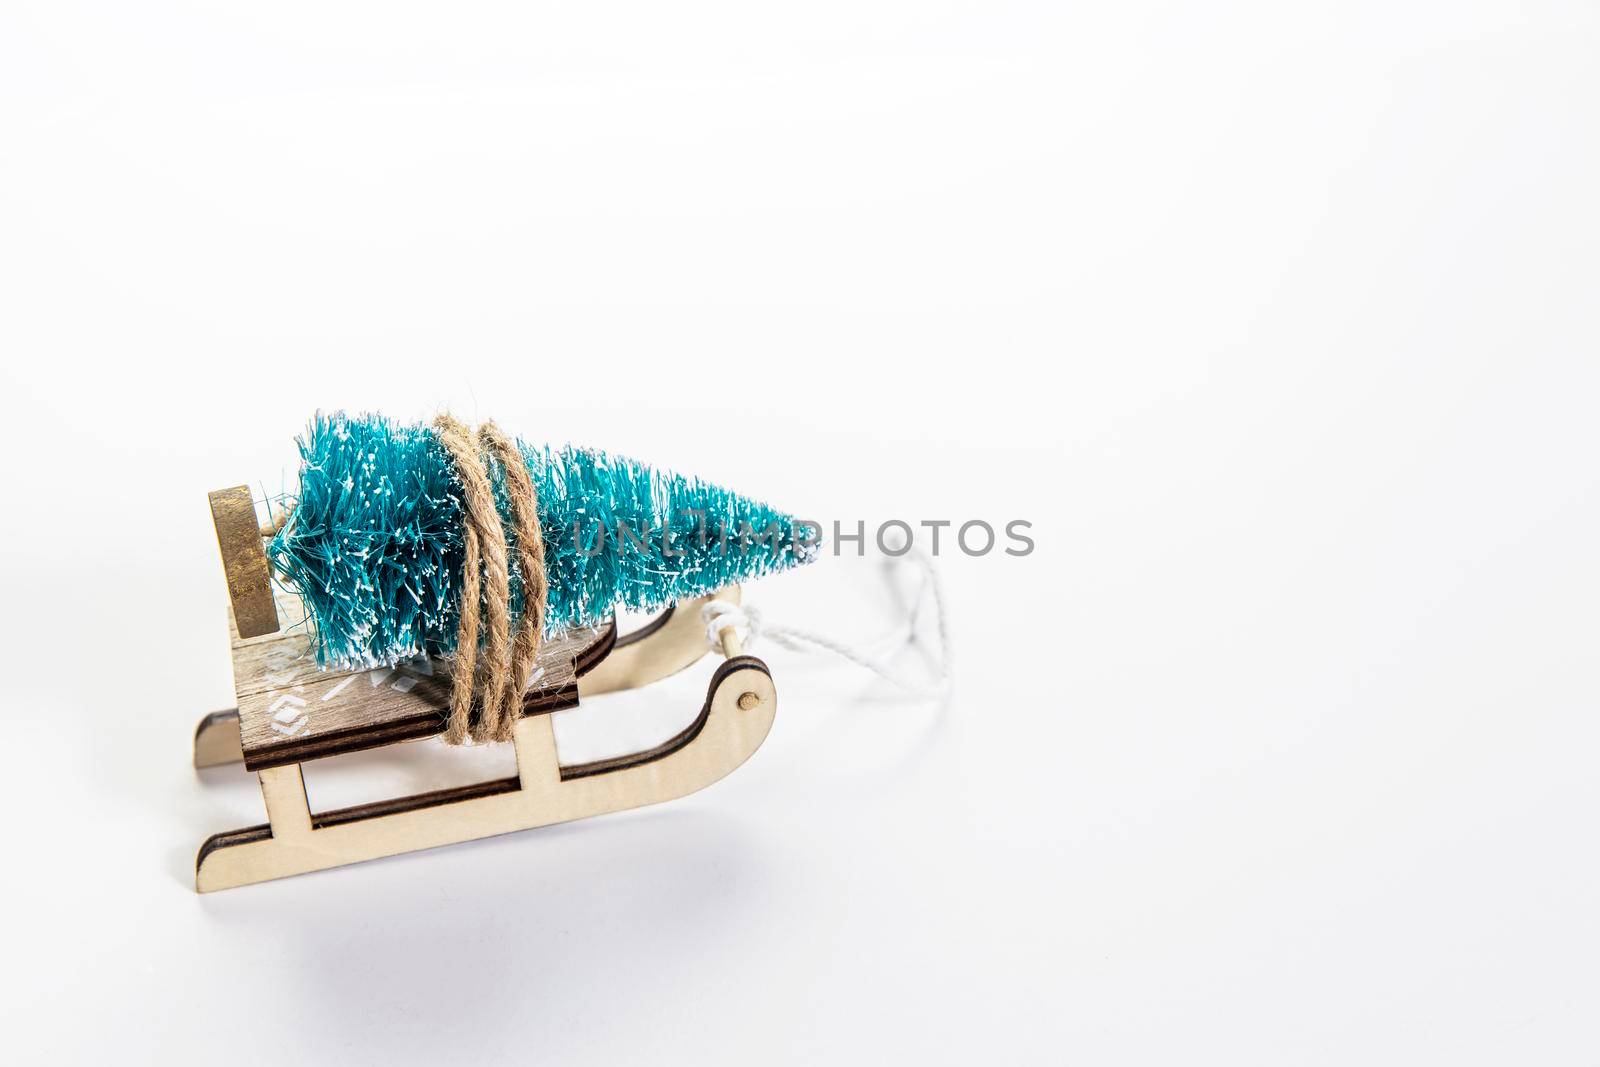 Wooden sleigh with decorative fir tree on white background. Christmas holidays. Copy space. Place for text. Card